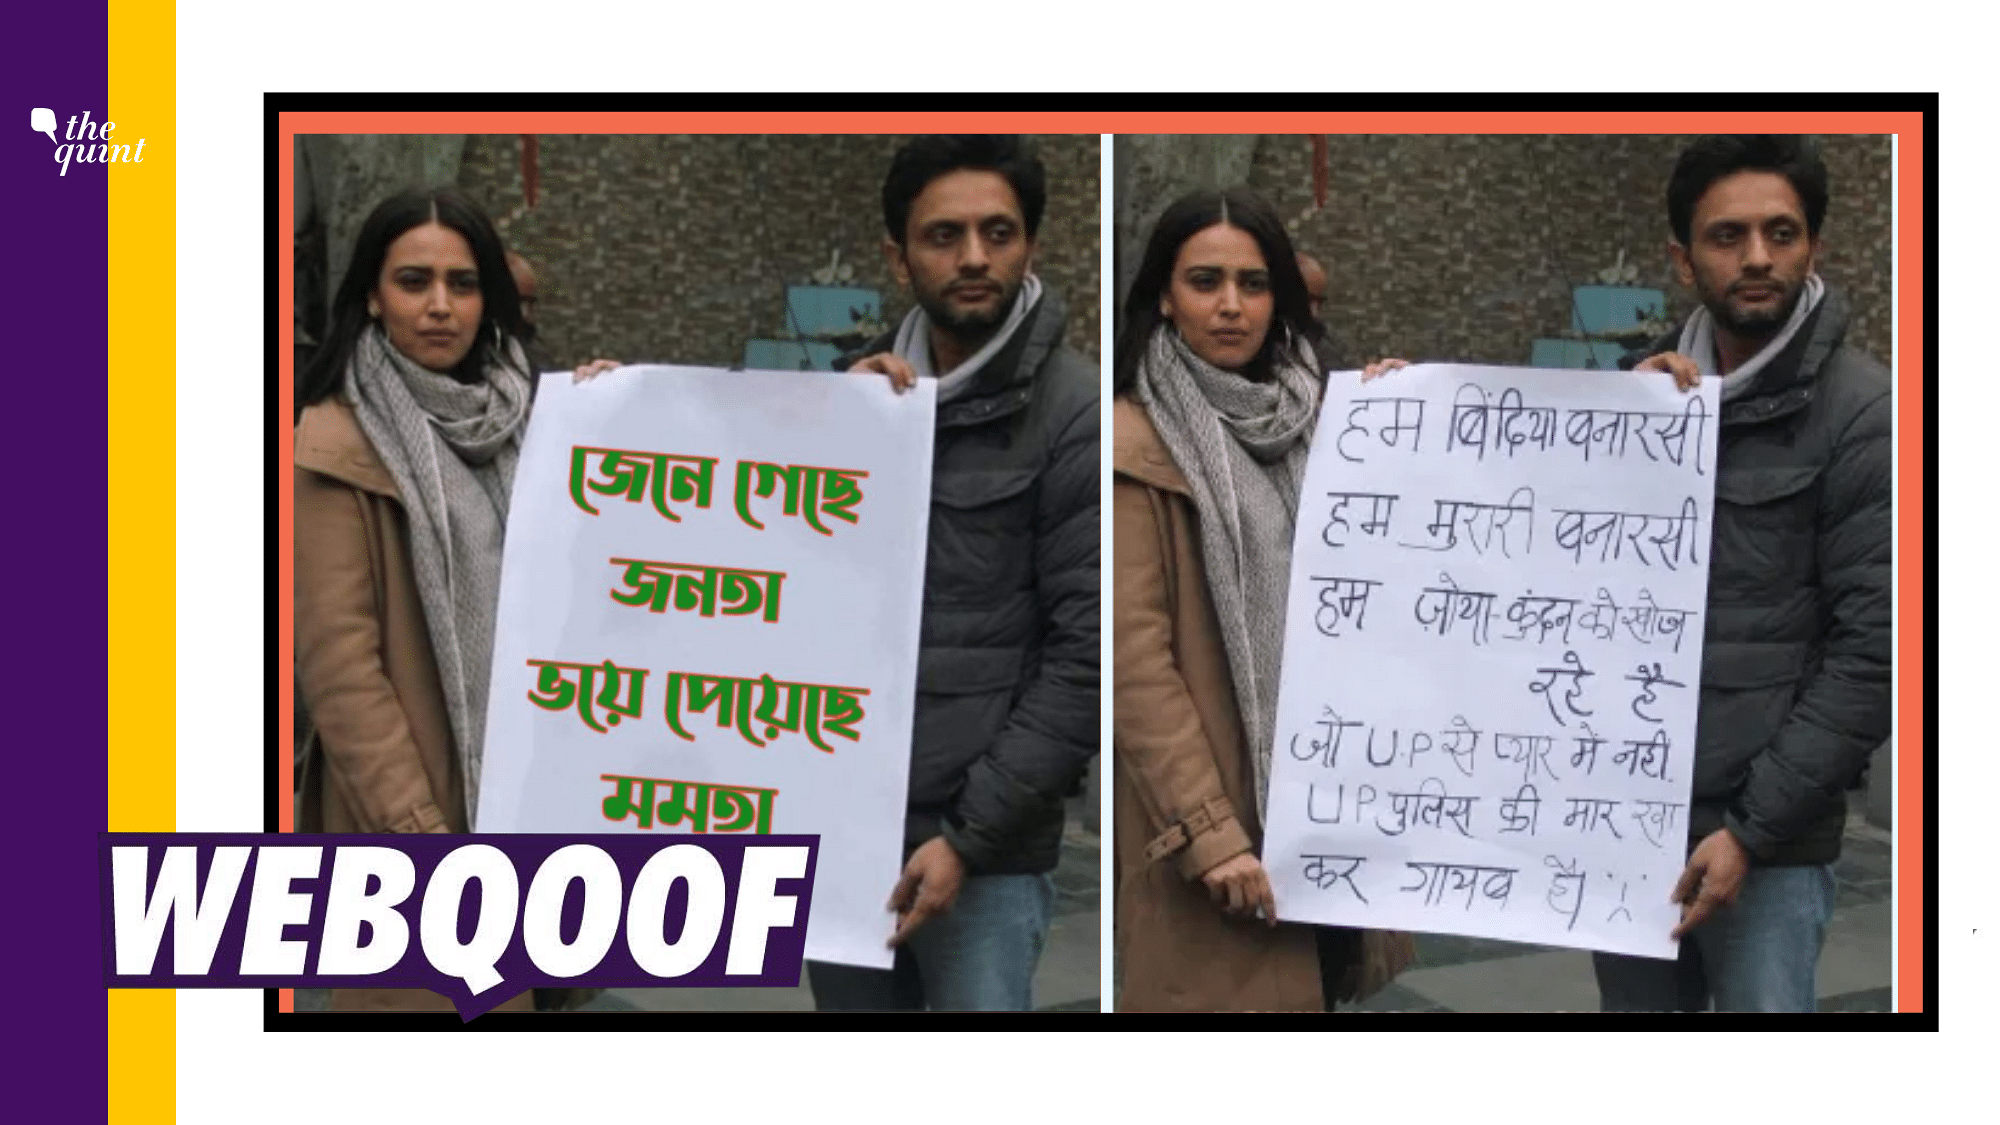 The original photograph is from December 2019, when Swara Bhasker and some other activists held a press conference in Delhi.